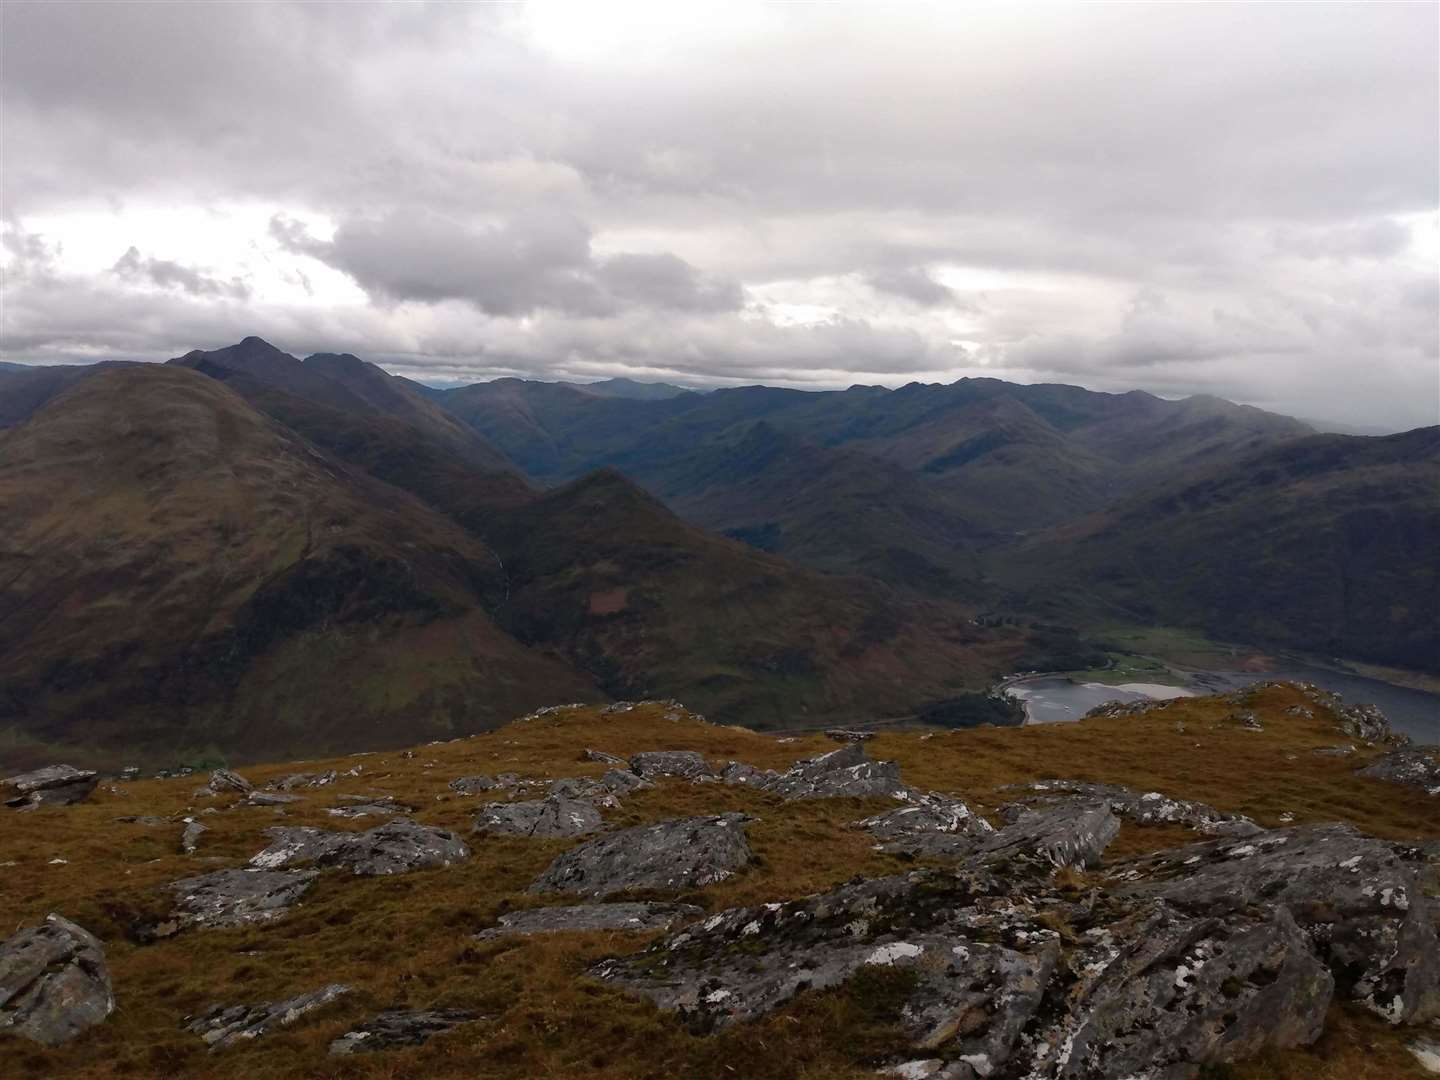 The Five Sisters of Kintail (left) and Glen Shiel from the top of Sgurr an Airgid.